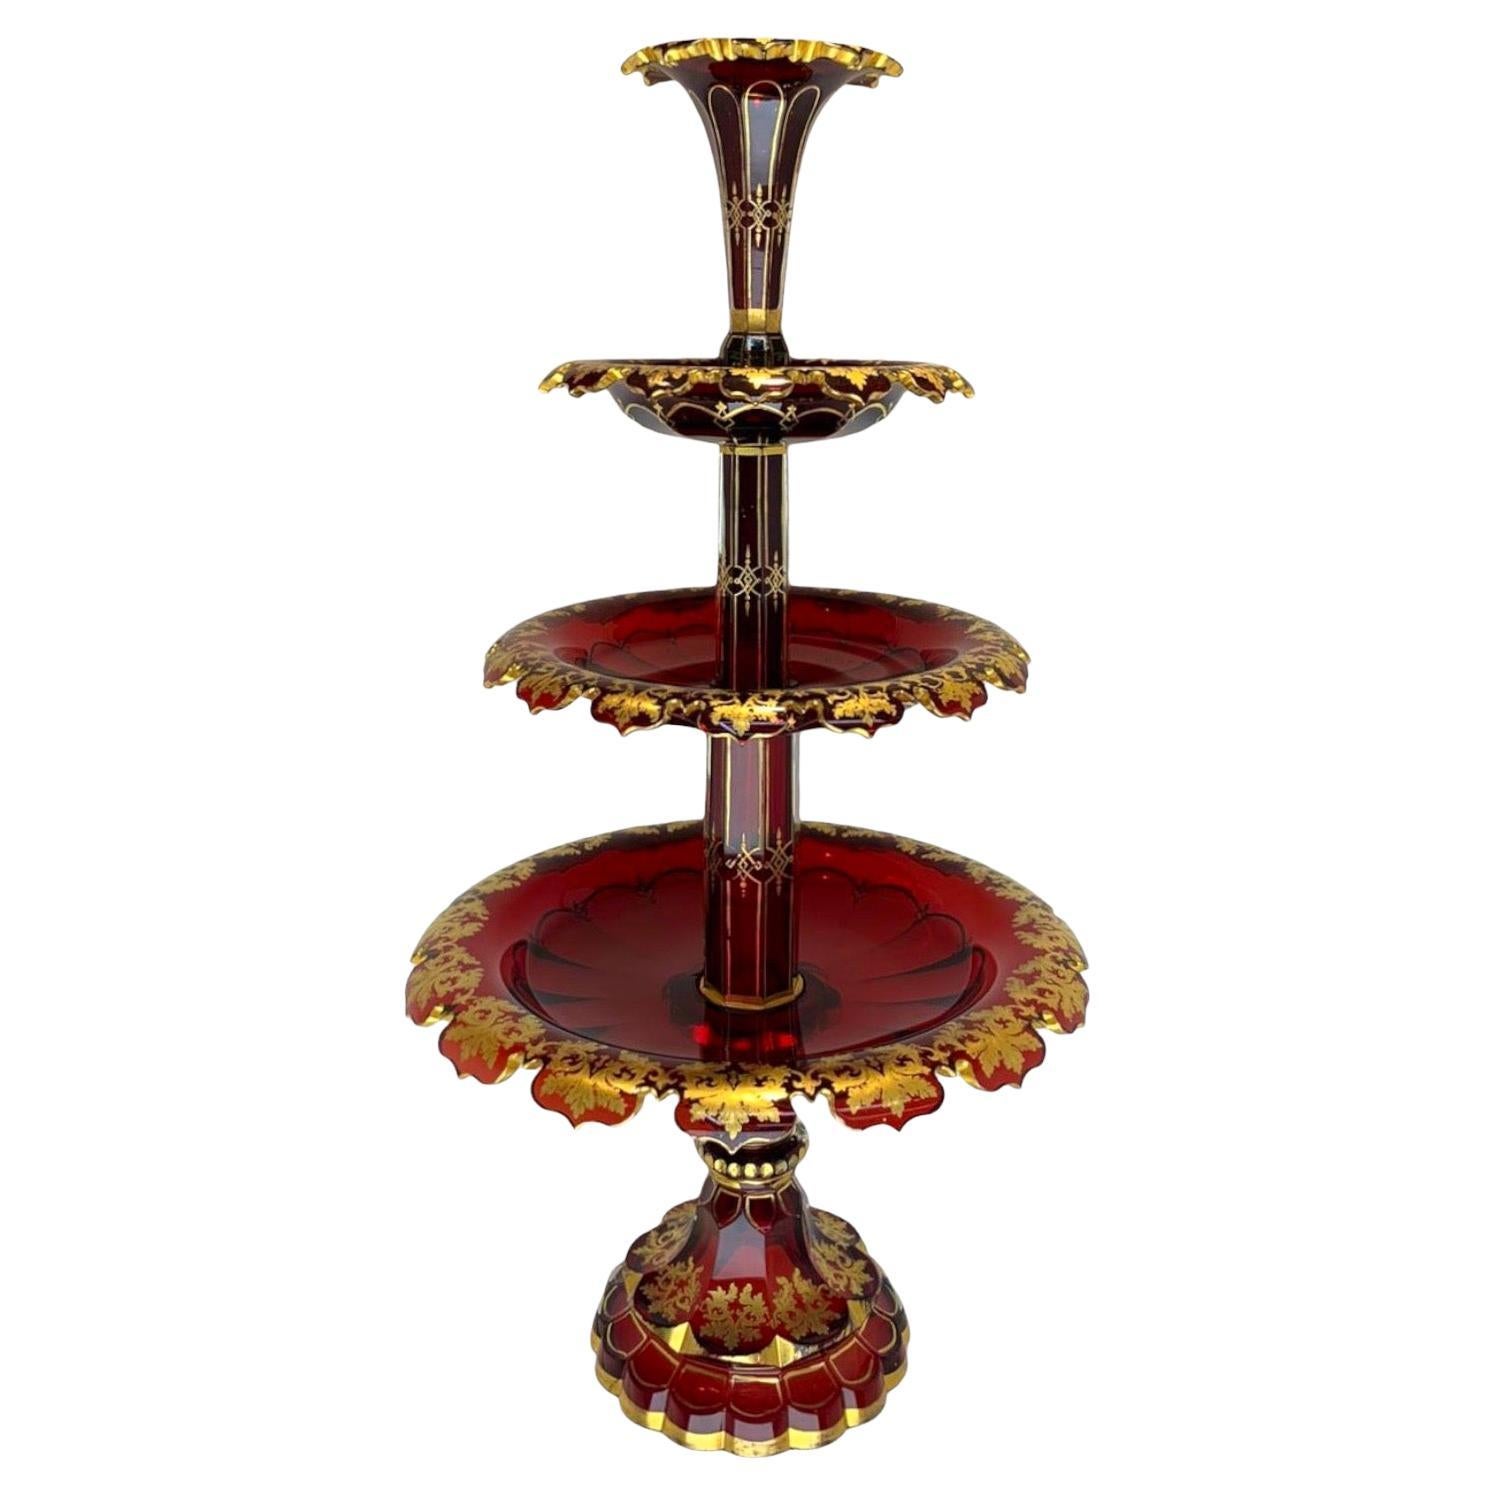 Museum Quality Bohemian Ruby Red Crystal Centrepiece with Fine Gold Enamelling.

Comprises of a Stand, 3 Dishes and a Top Vase.

The Gold Decoration is in Excellent Condition.

A Wonderful Example of The Highest Quality Bohemian Glass.